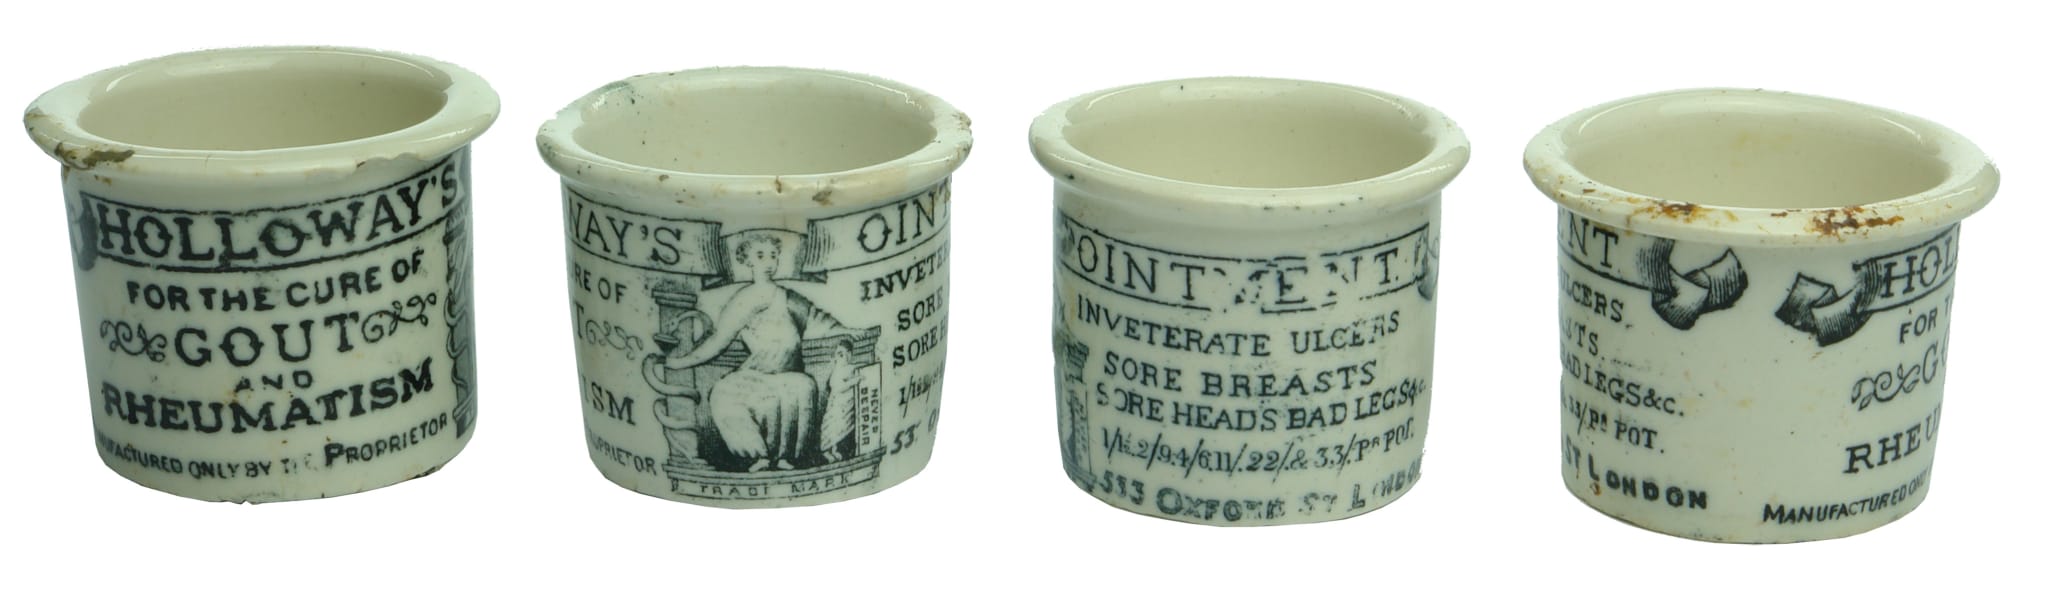 Holloway's Ointment Pots